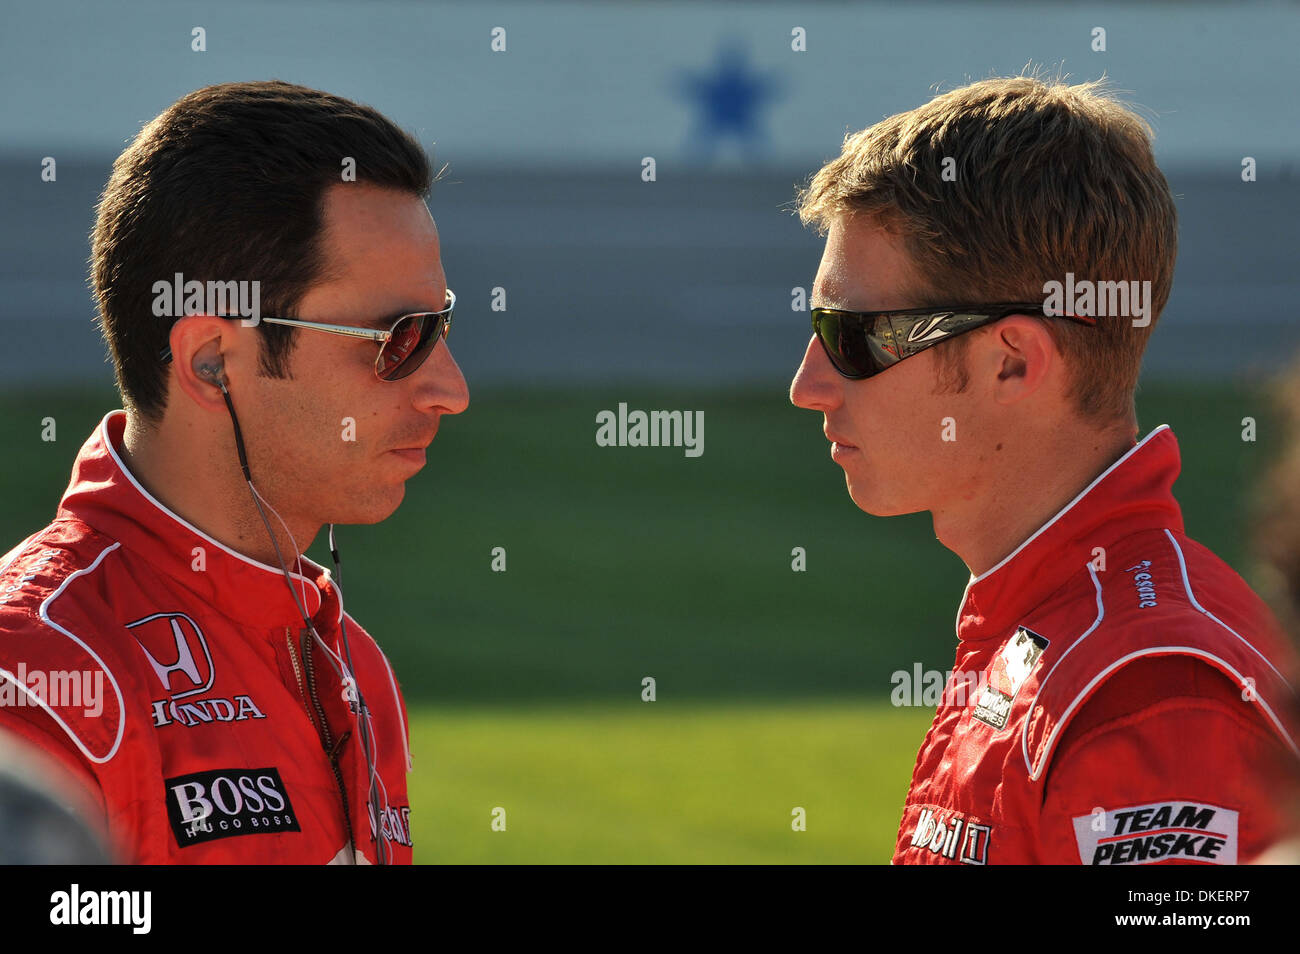 Jun 06, 2009 - Fort Worth, Texas, USA - Penske Team drivers HELIO CASTRONEVES and RYAN BRISCOE talk before the start of the Indy Racing League Learjet Bombardier 550 at the Texas Motor Speedway. (Credit Image: © David Bailey/ZUMA Press) Stock Photo